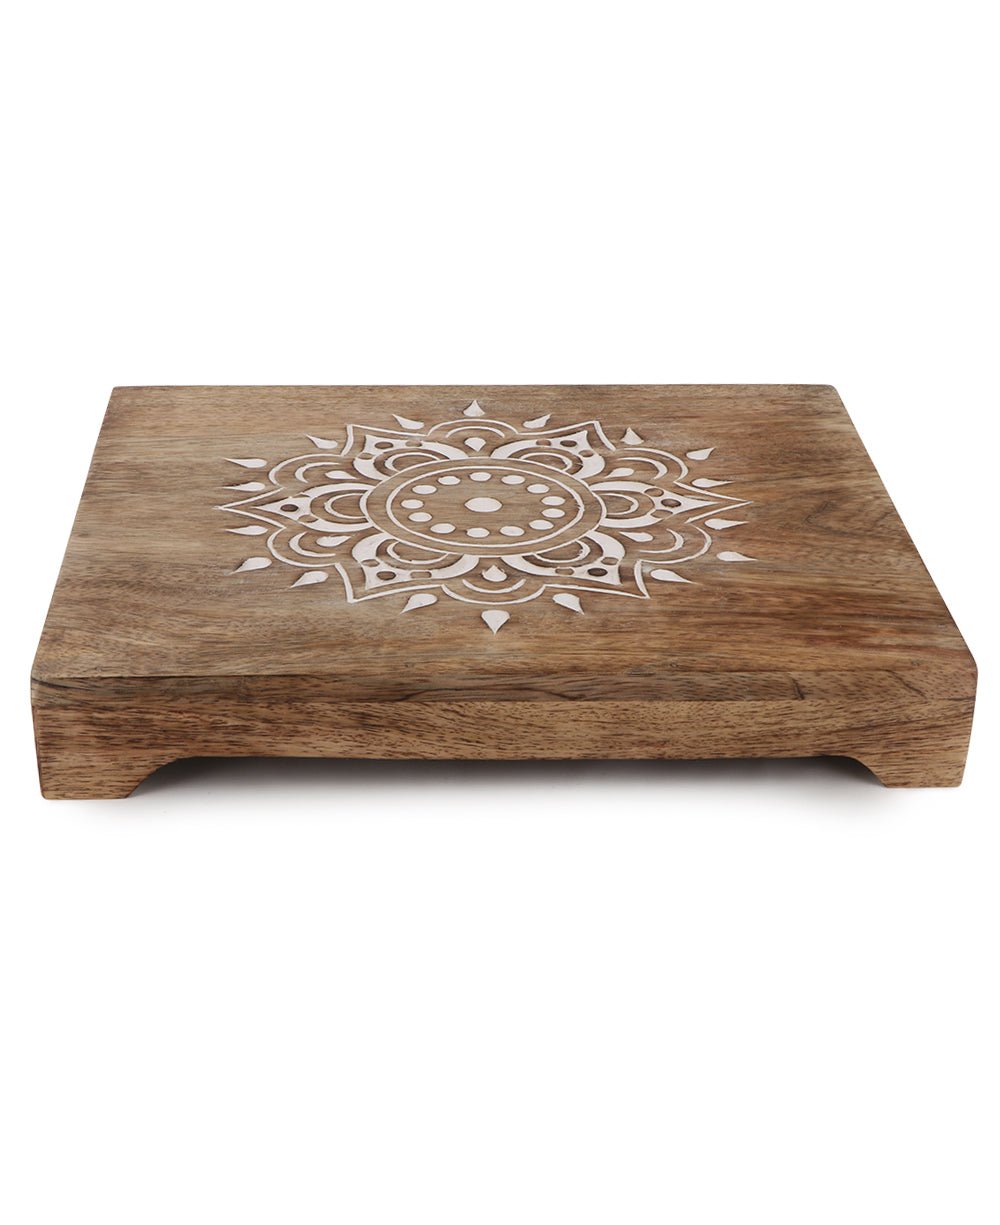 Fairtrade Sustainable Wood Mandala Risers And Statue Stands - Computer Risers & Stands Rectangular